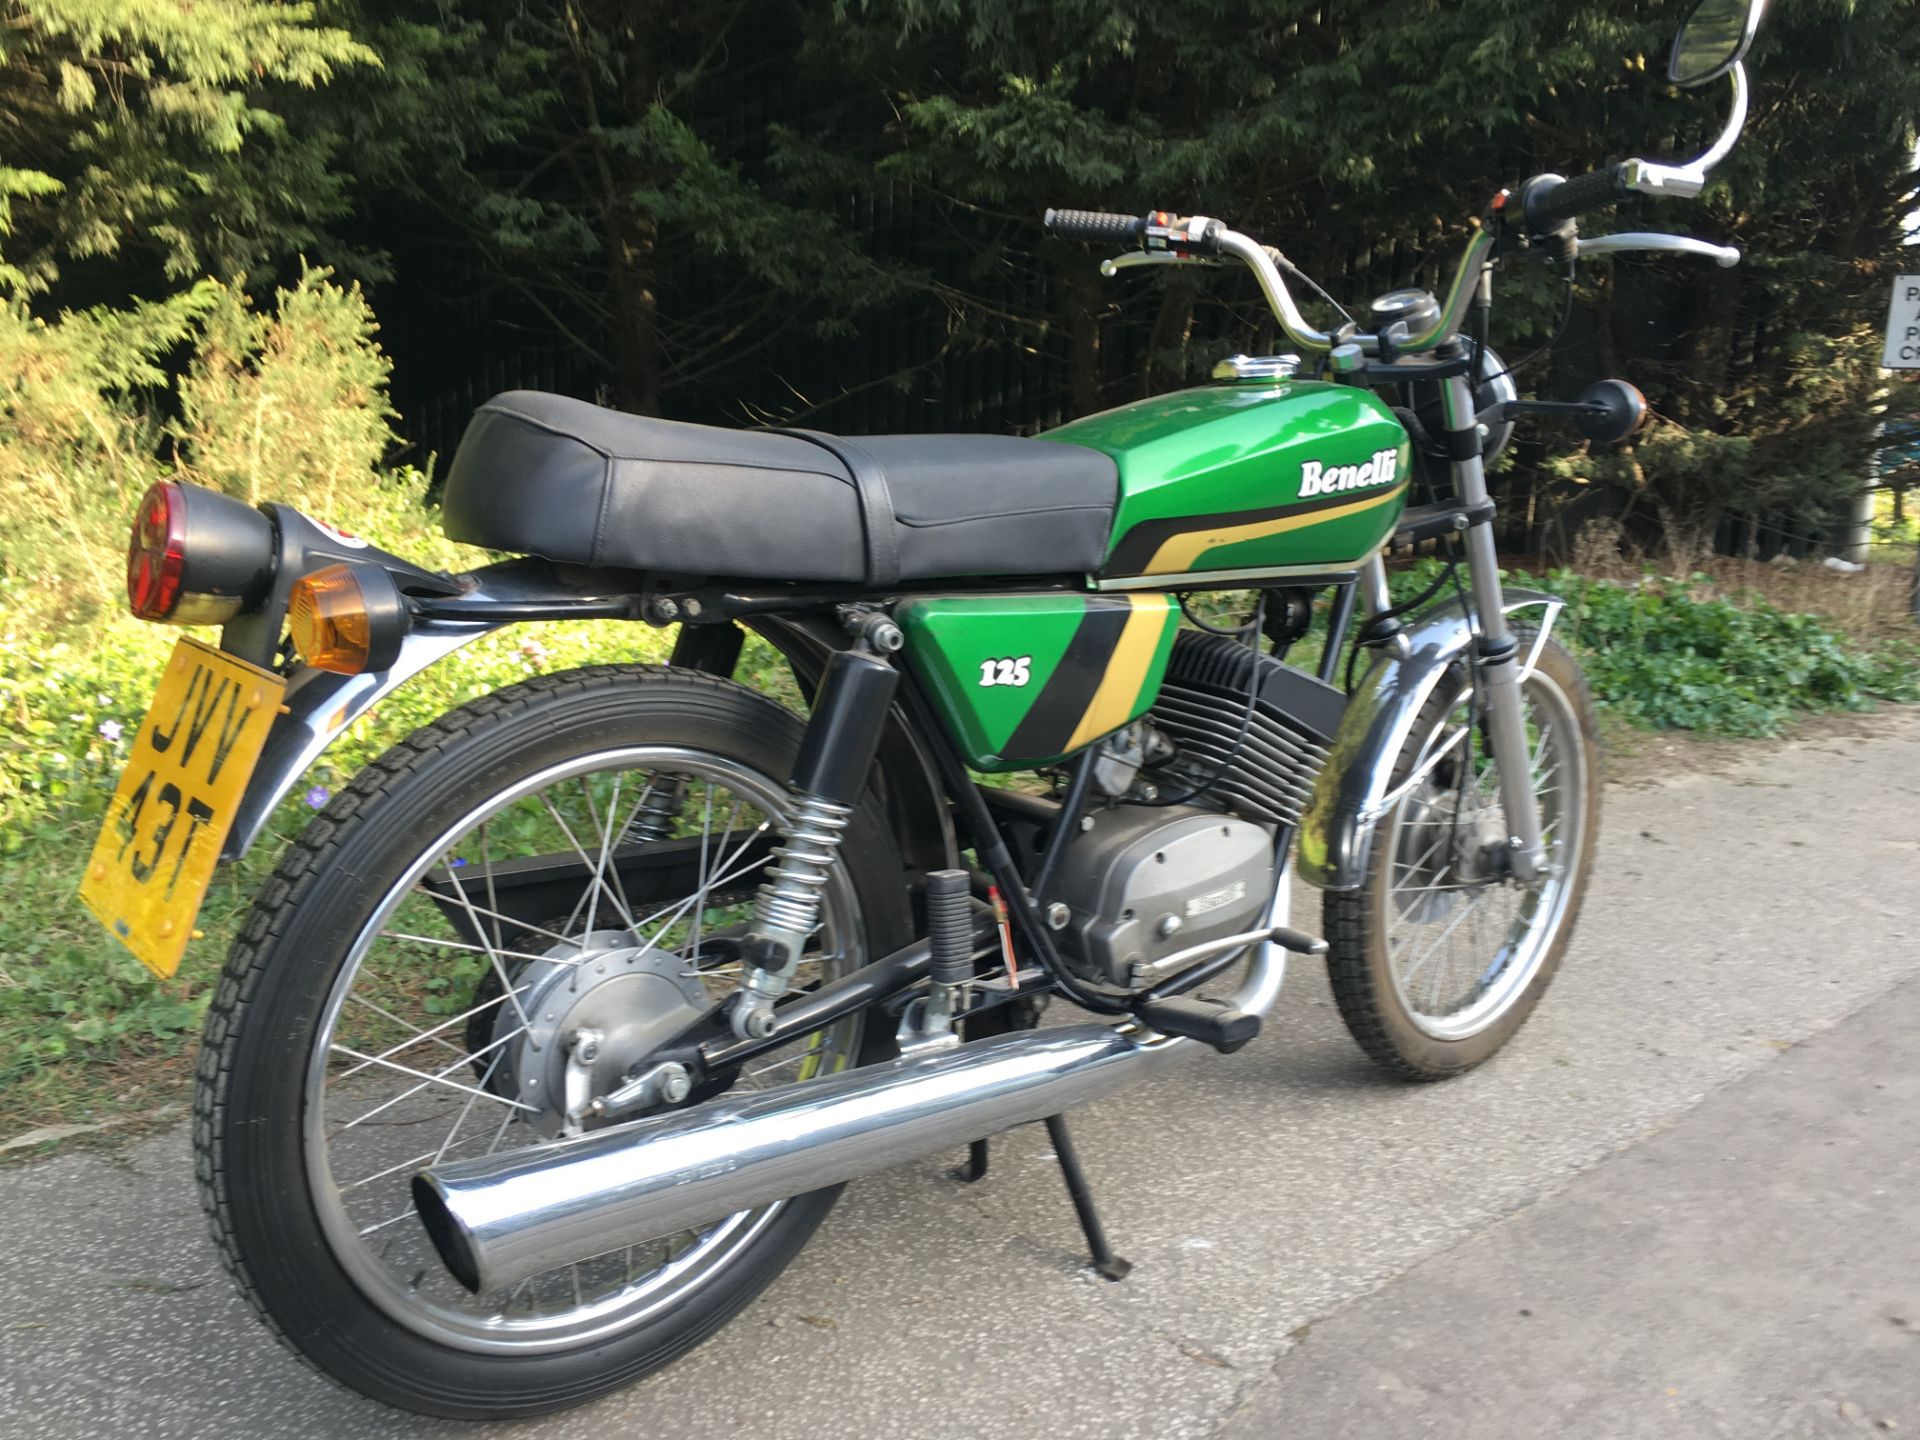 1978 Benelli 125s - Image 21 of 28